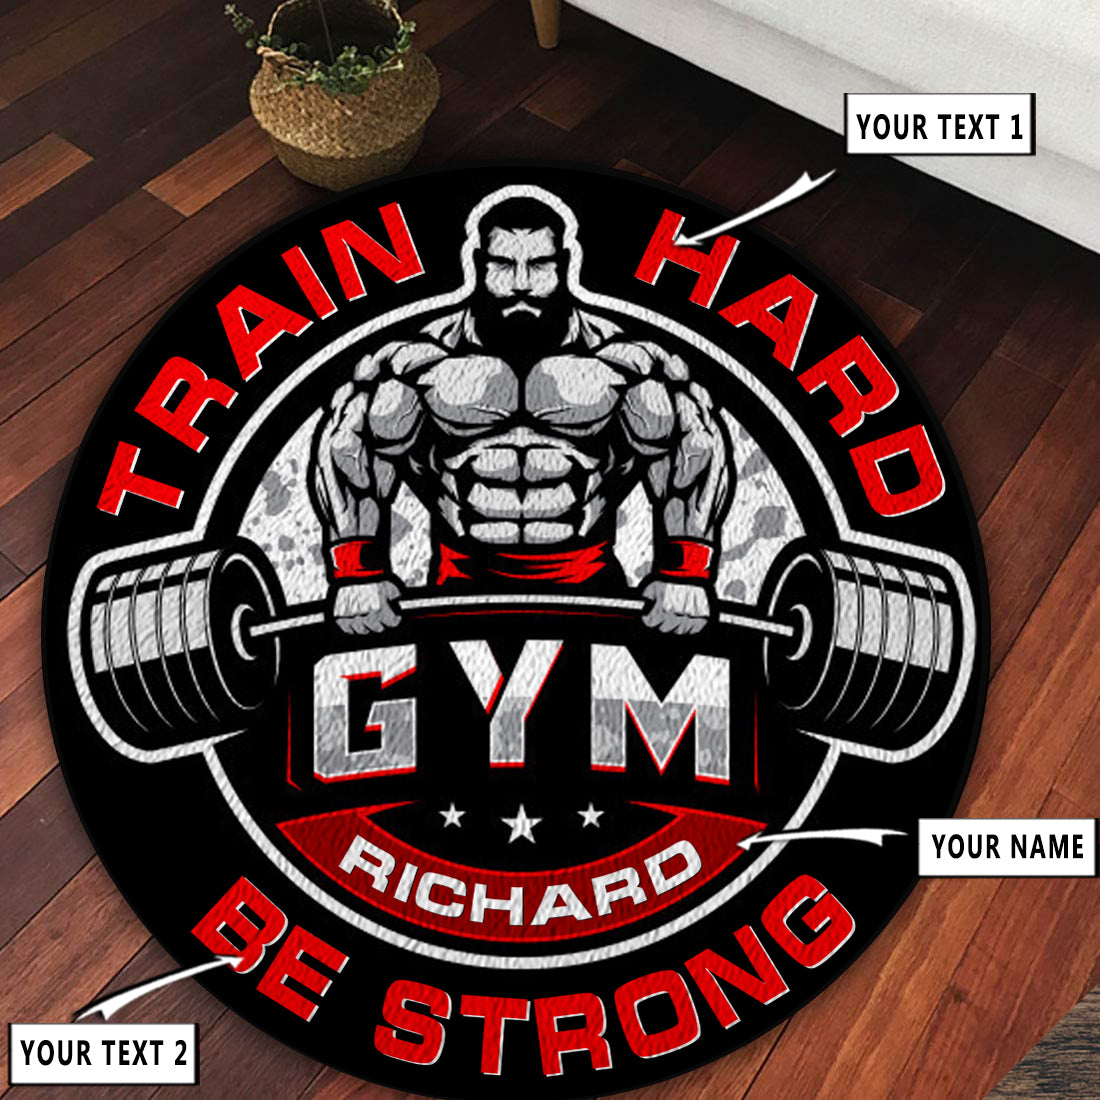 Personalized Bodybuilding Home Gym Decor Train Hard Be Strong Round Rug, Carpet